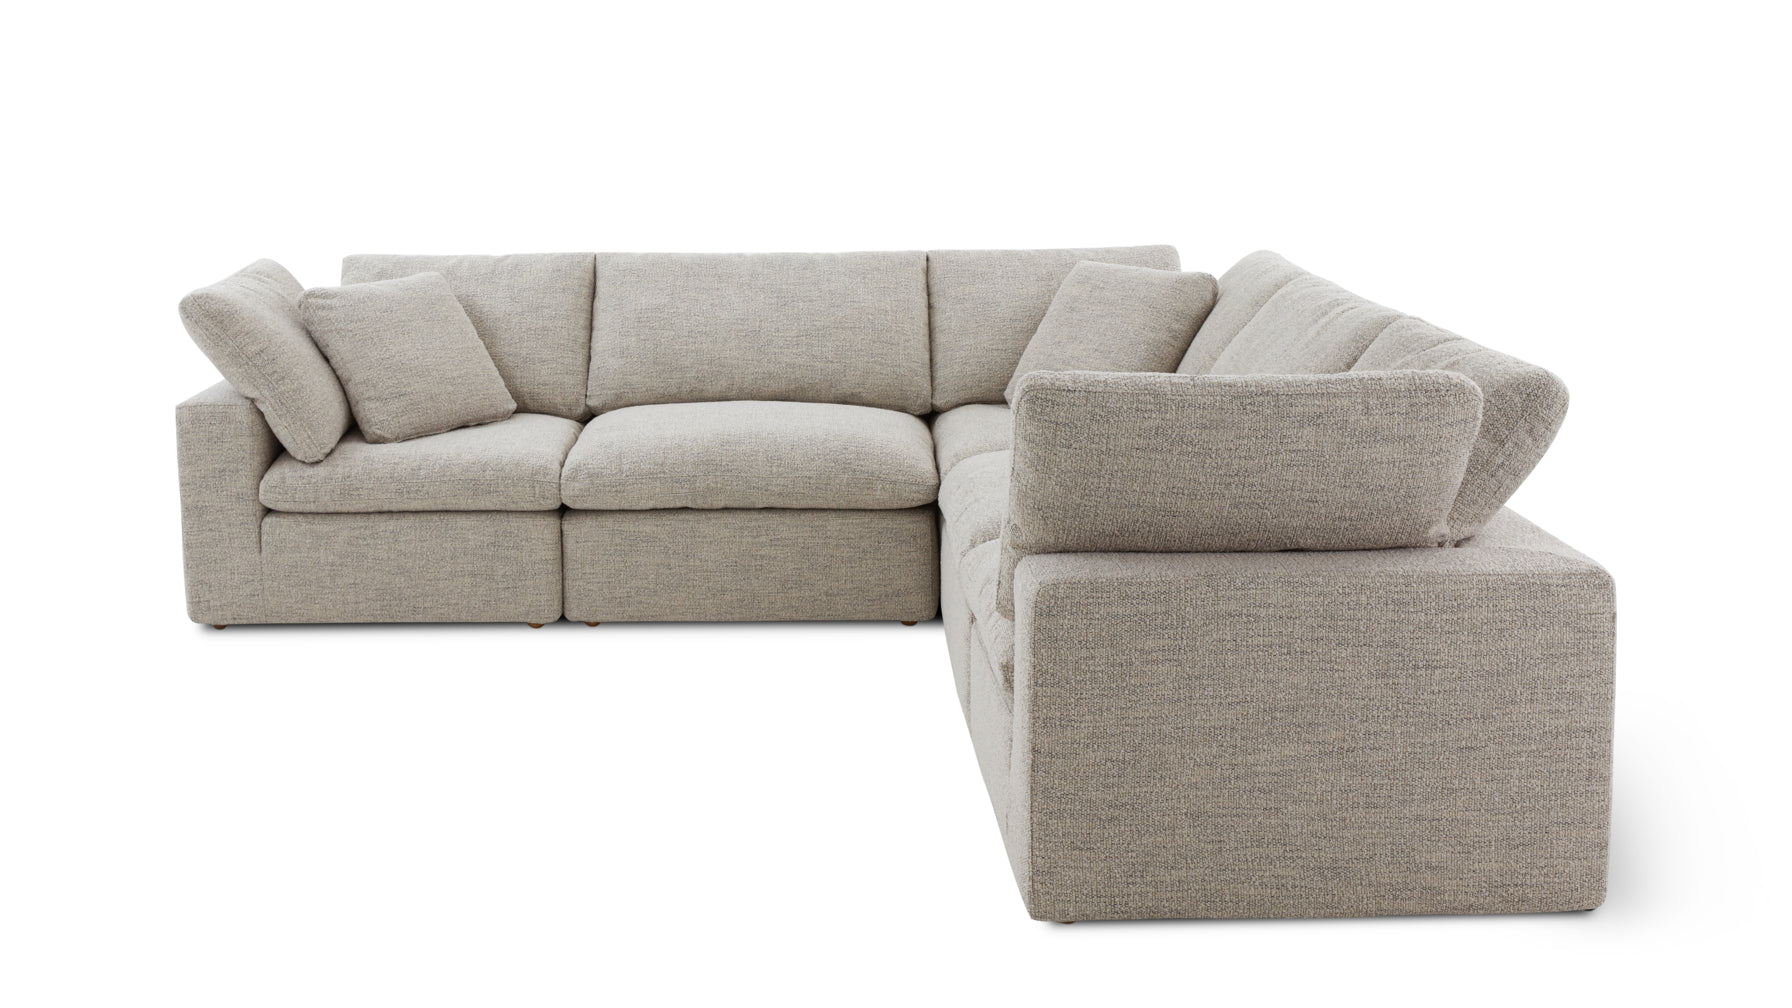 Movie Night™ 5-Piece Modular Sectional Closed, Standard, Oatmeal - Image 1